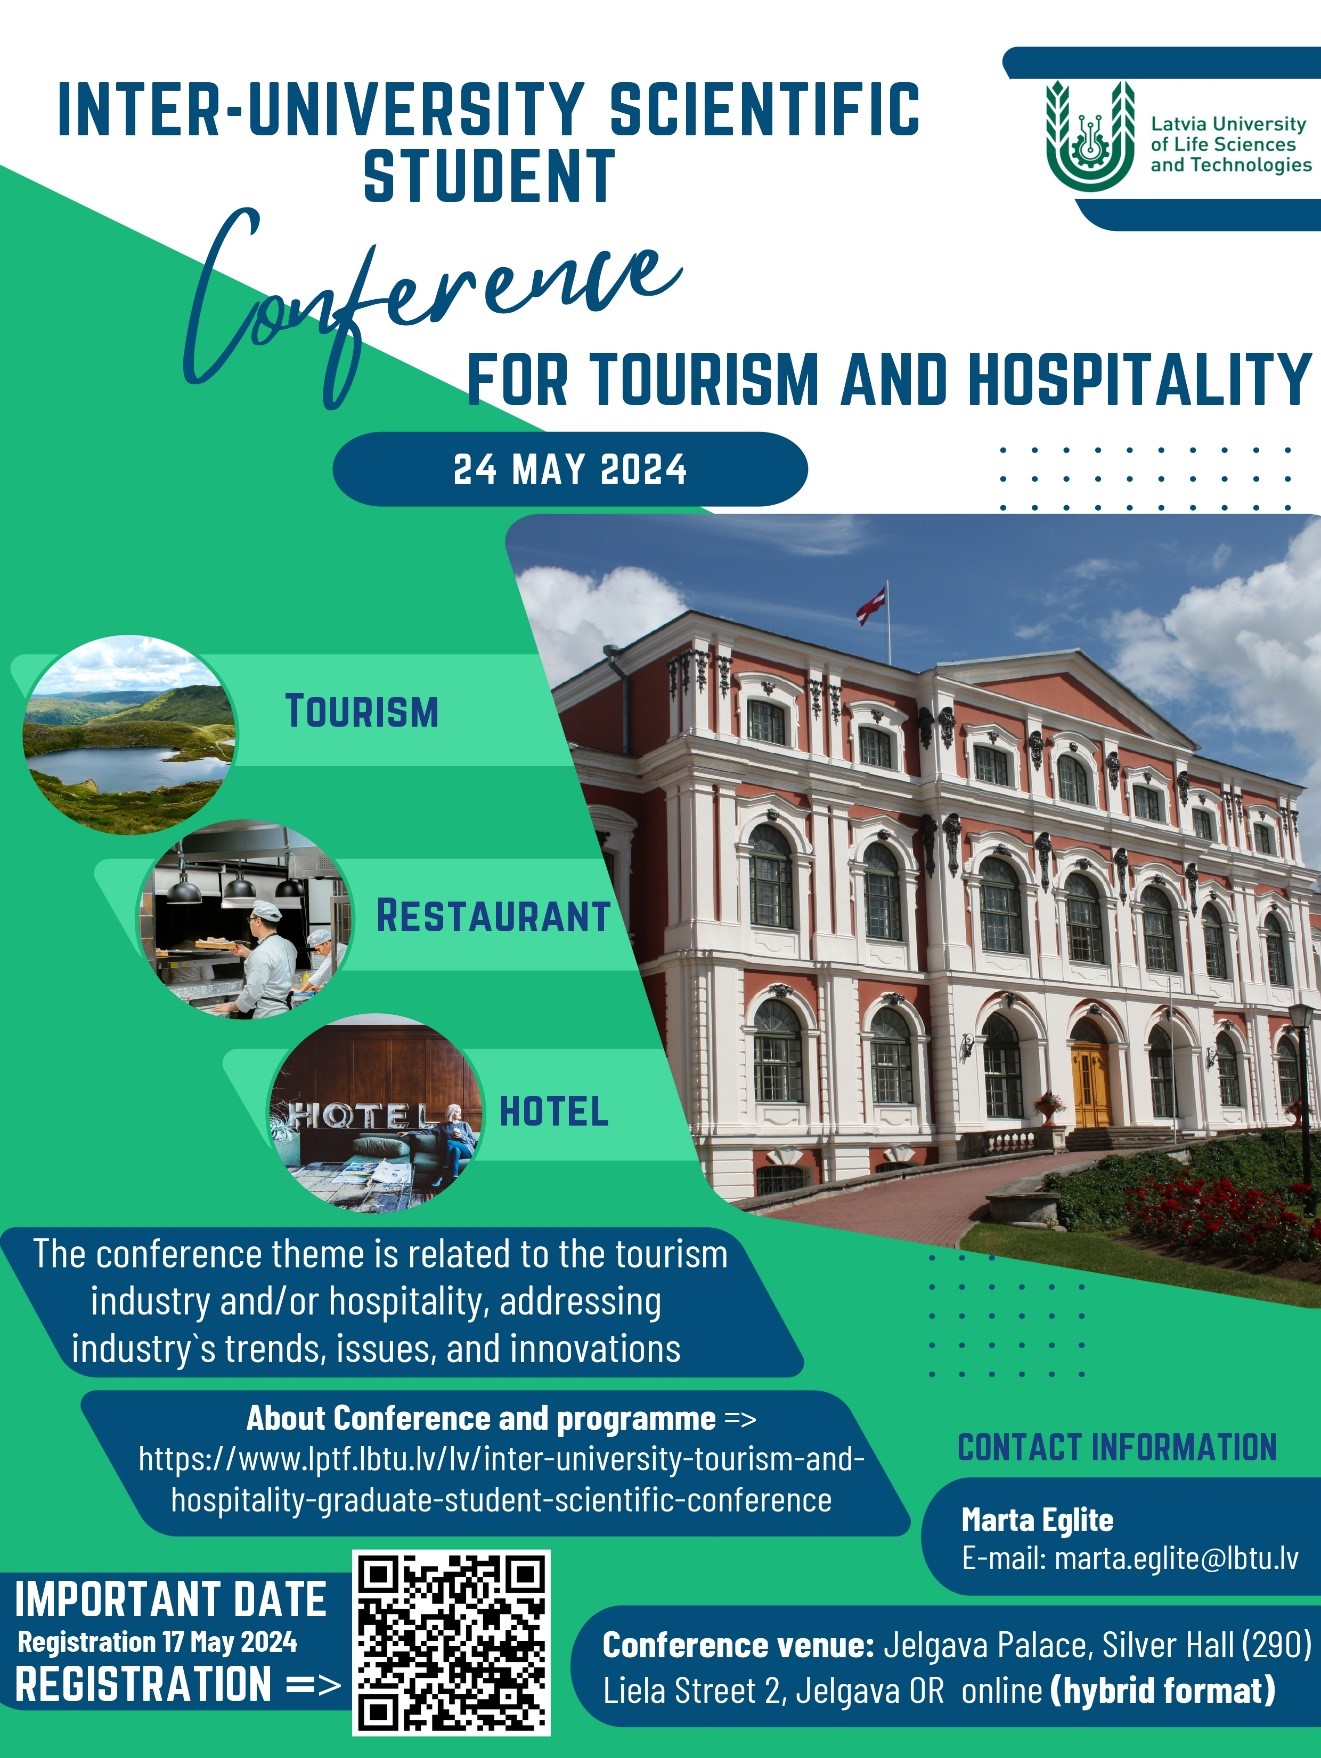 The Conference for tourism and hospitality